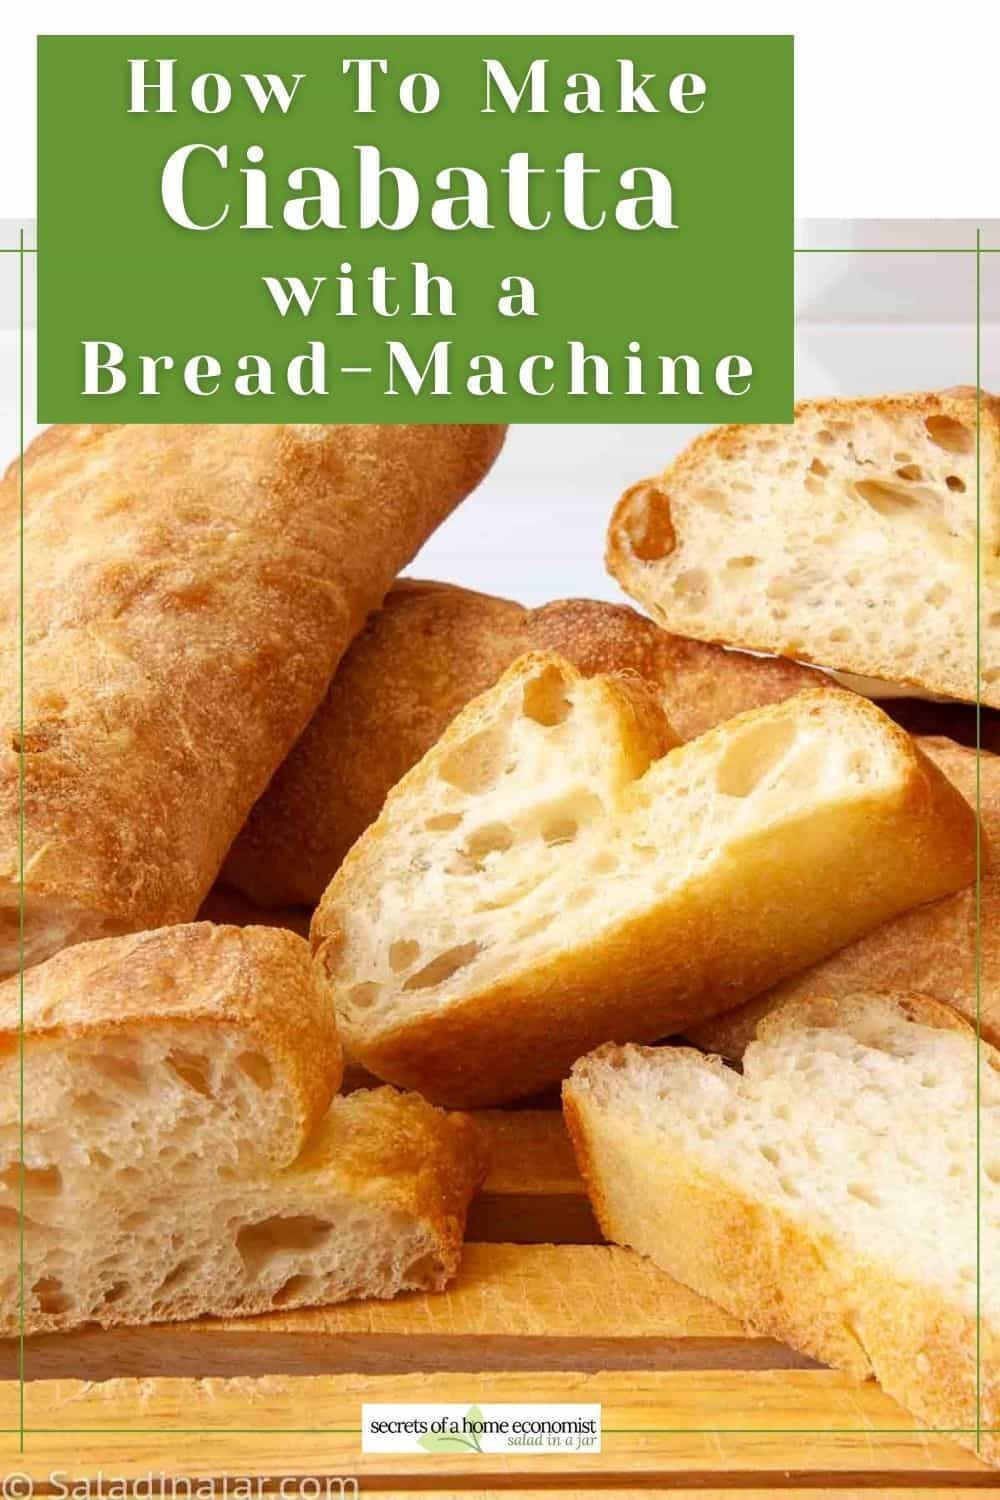 How to Make Ciabatta with a Bread Machine | Salad in a Jar